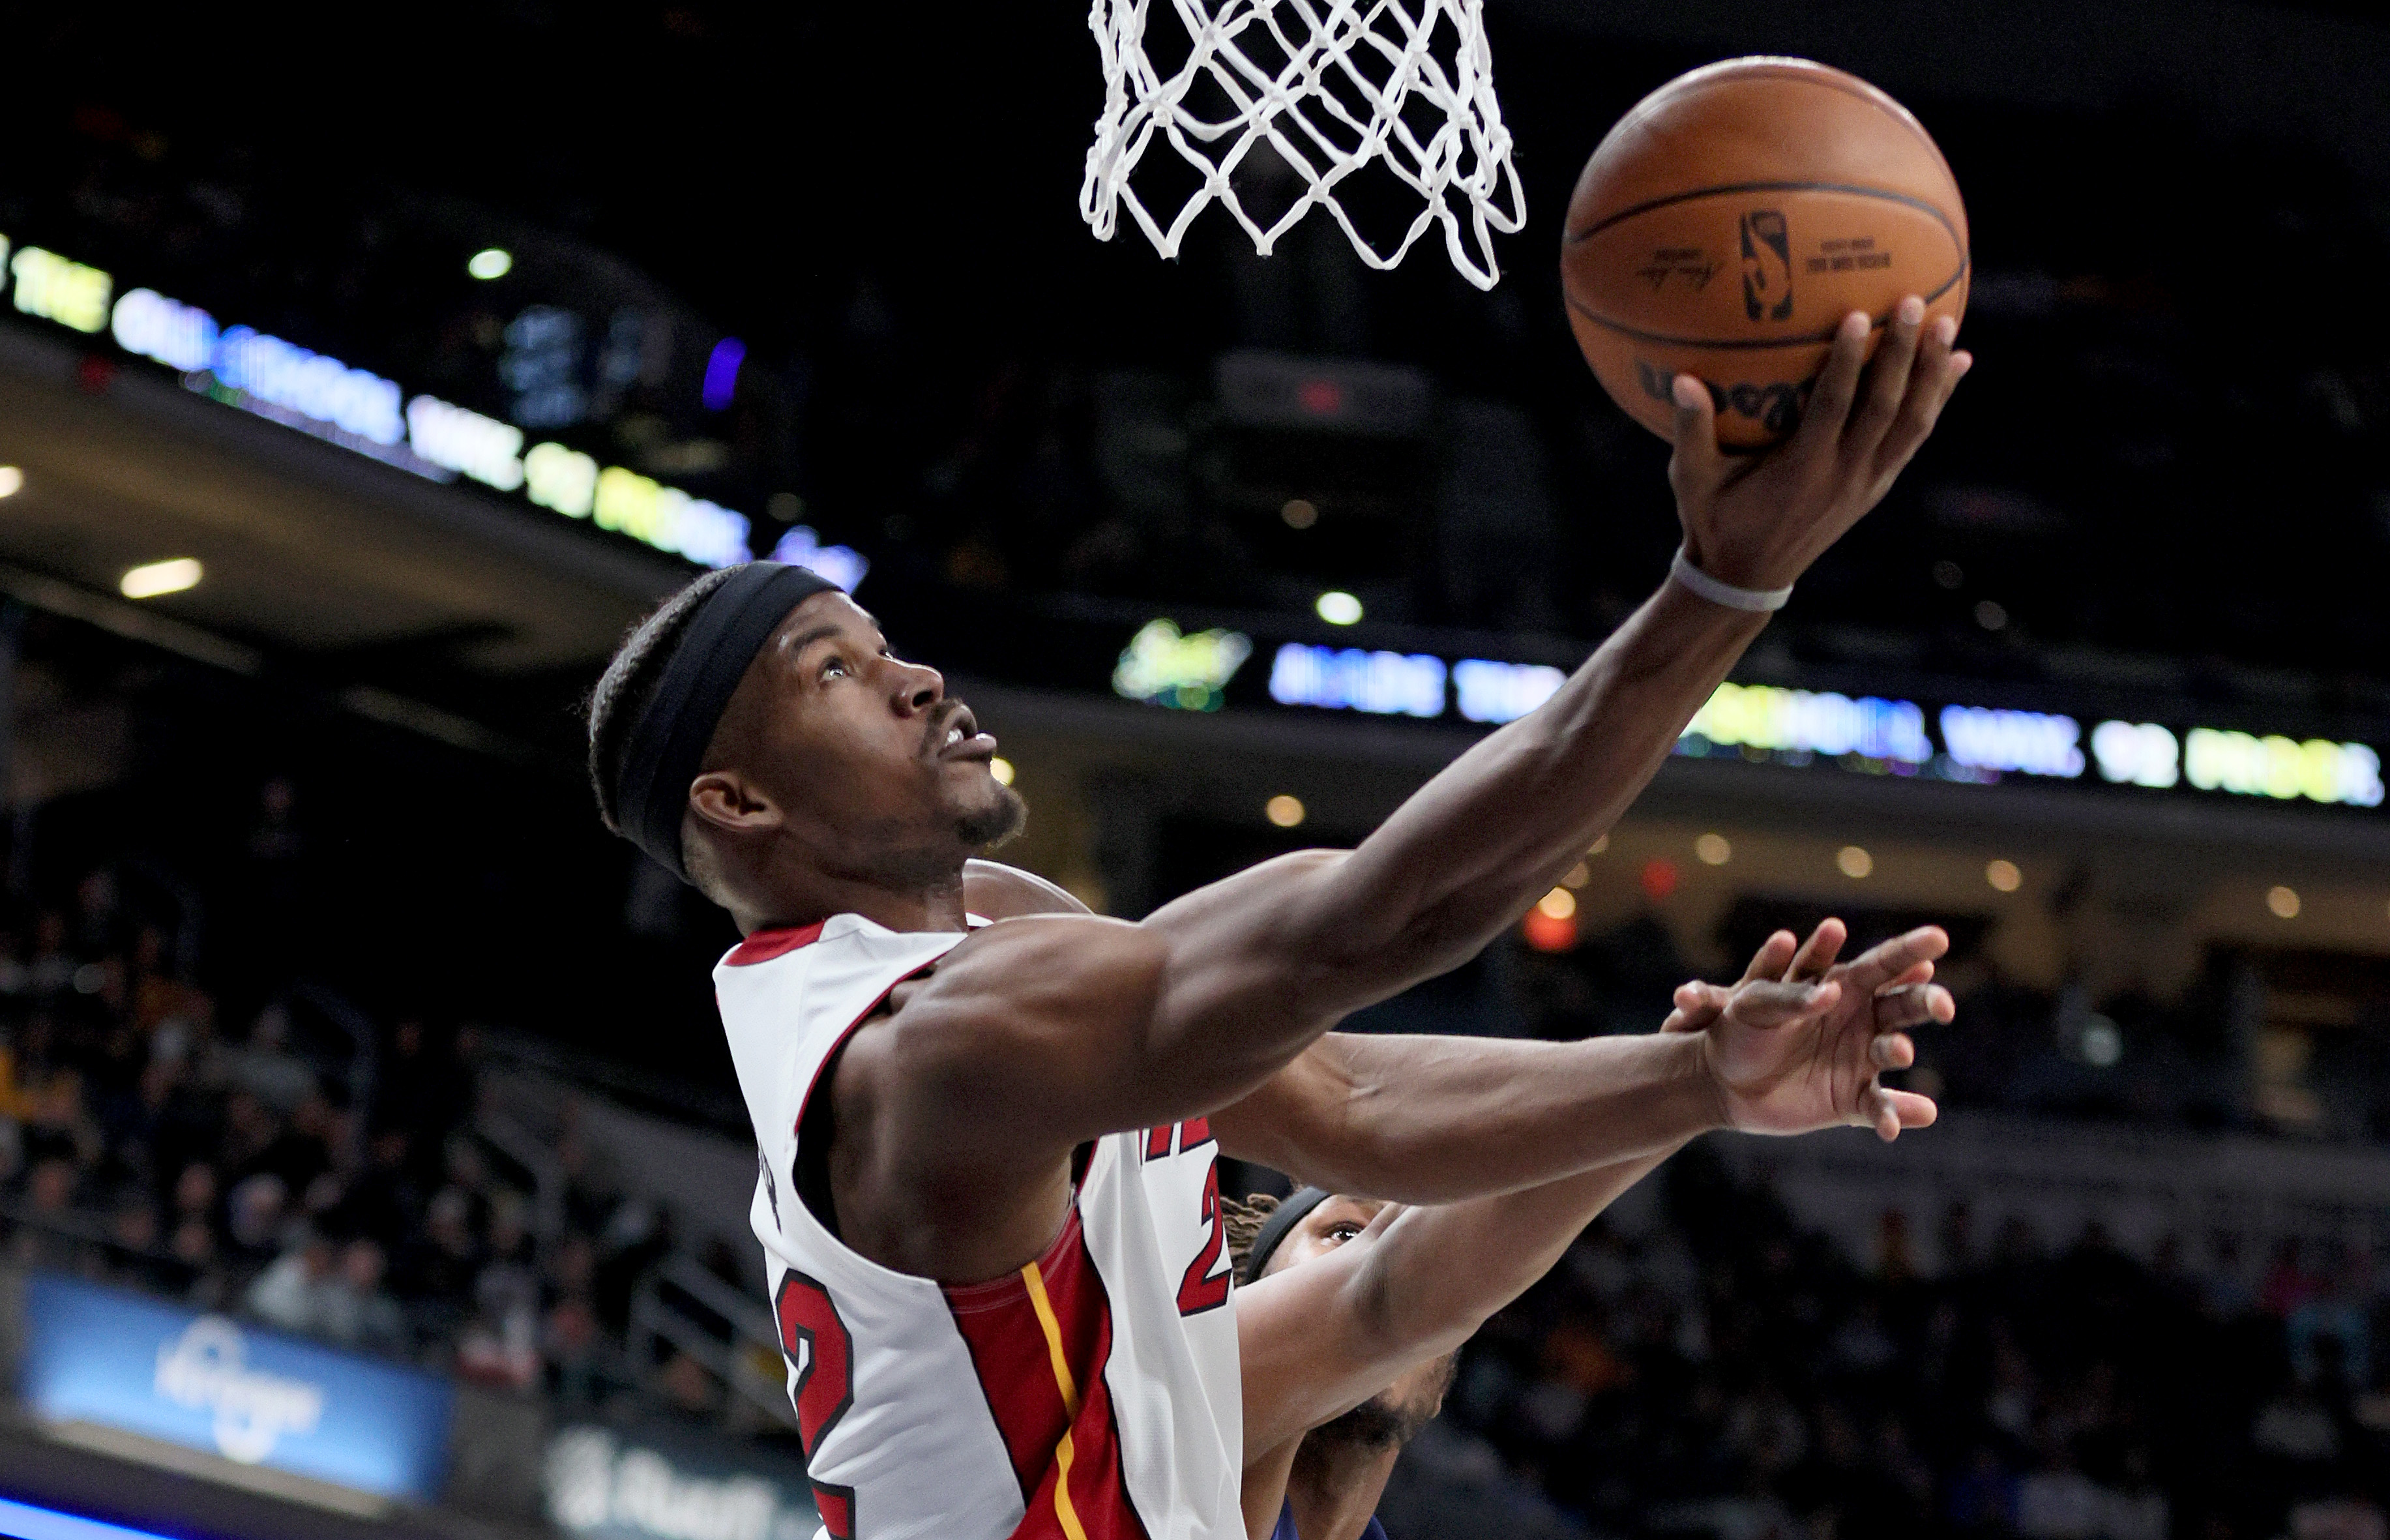 Butler’s late flurry helps Heat put away Pacers 87-82